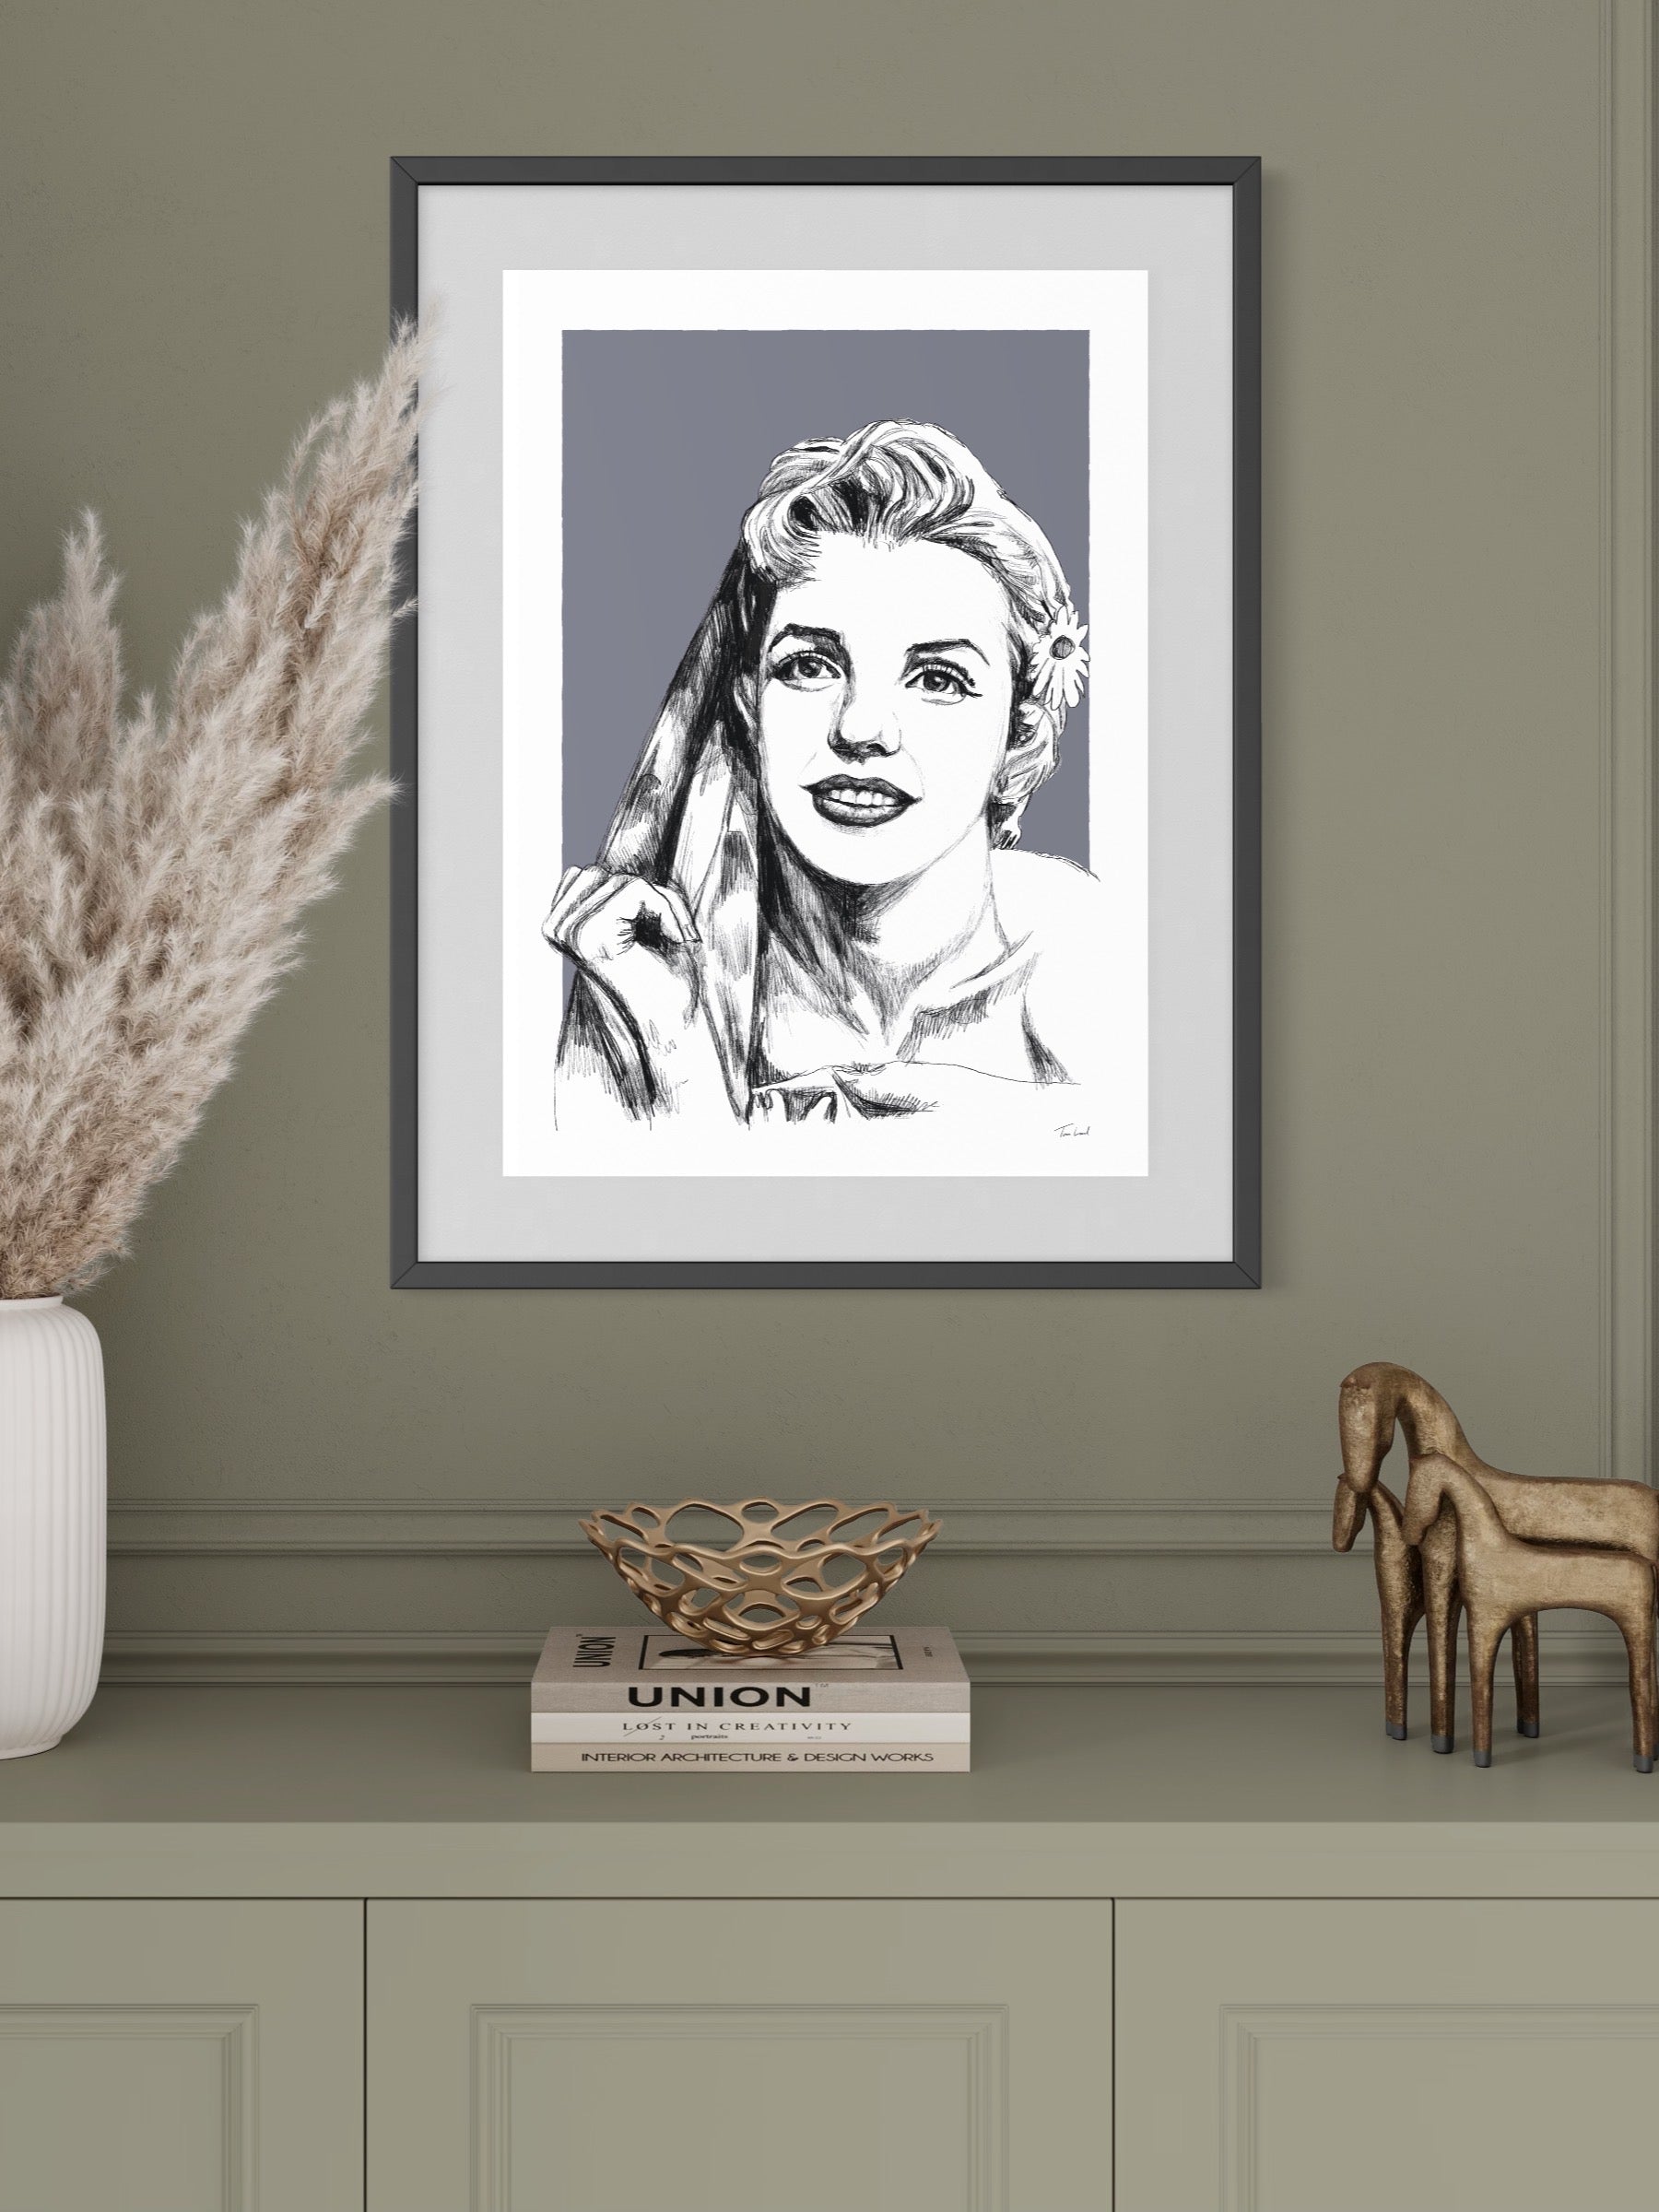 This image shows a giclee wall art print by Tom Laird Illustration of movie legend and Candle in The Wind subject, framed in a beautiful room with tasteful modern home decor. This art print is available from Tom Laird Illustration in various sizes.